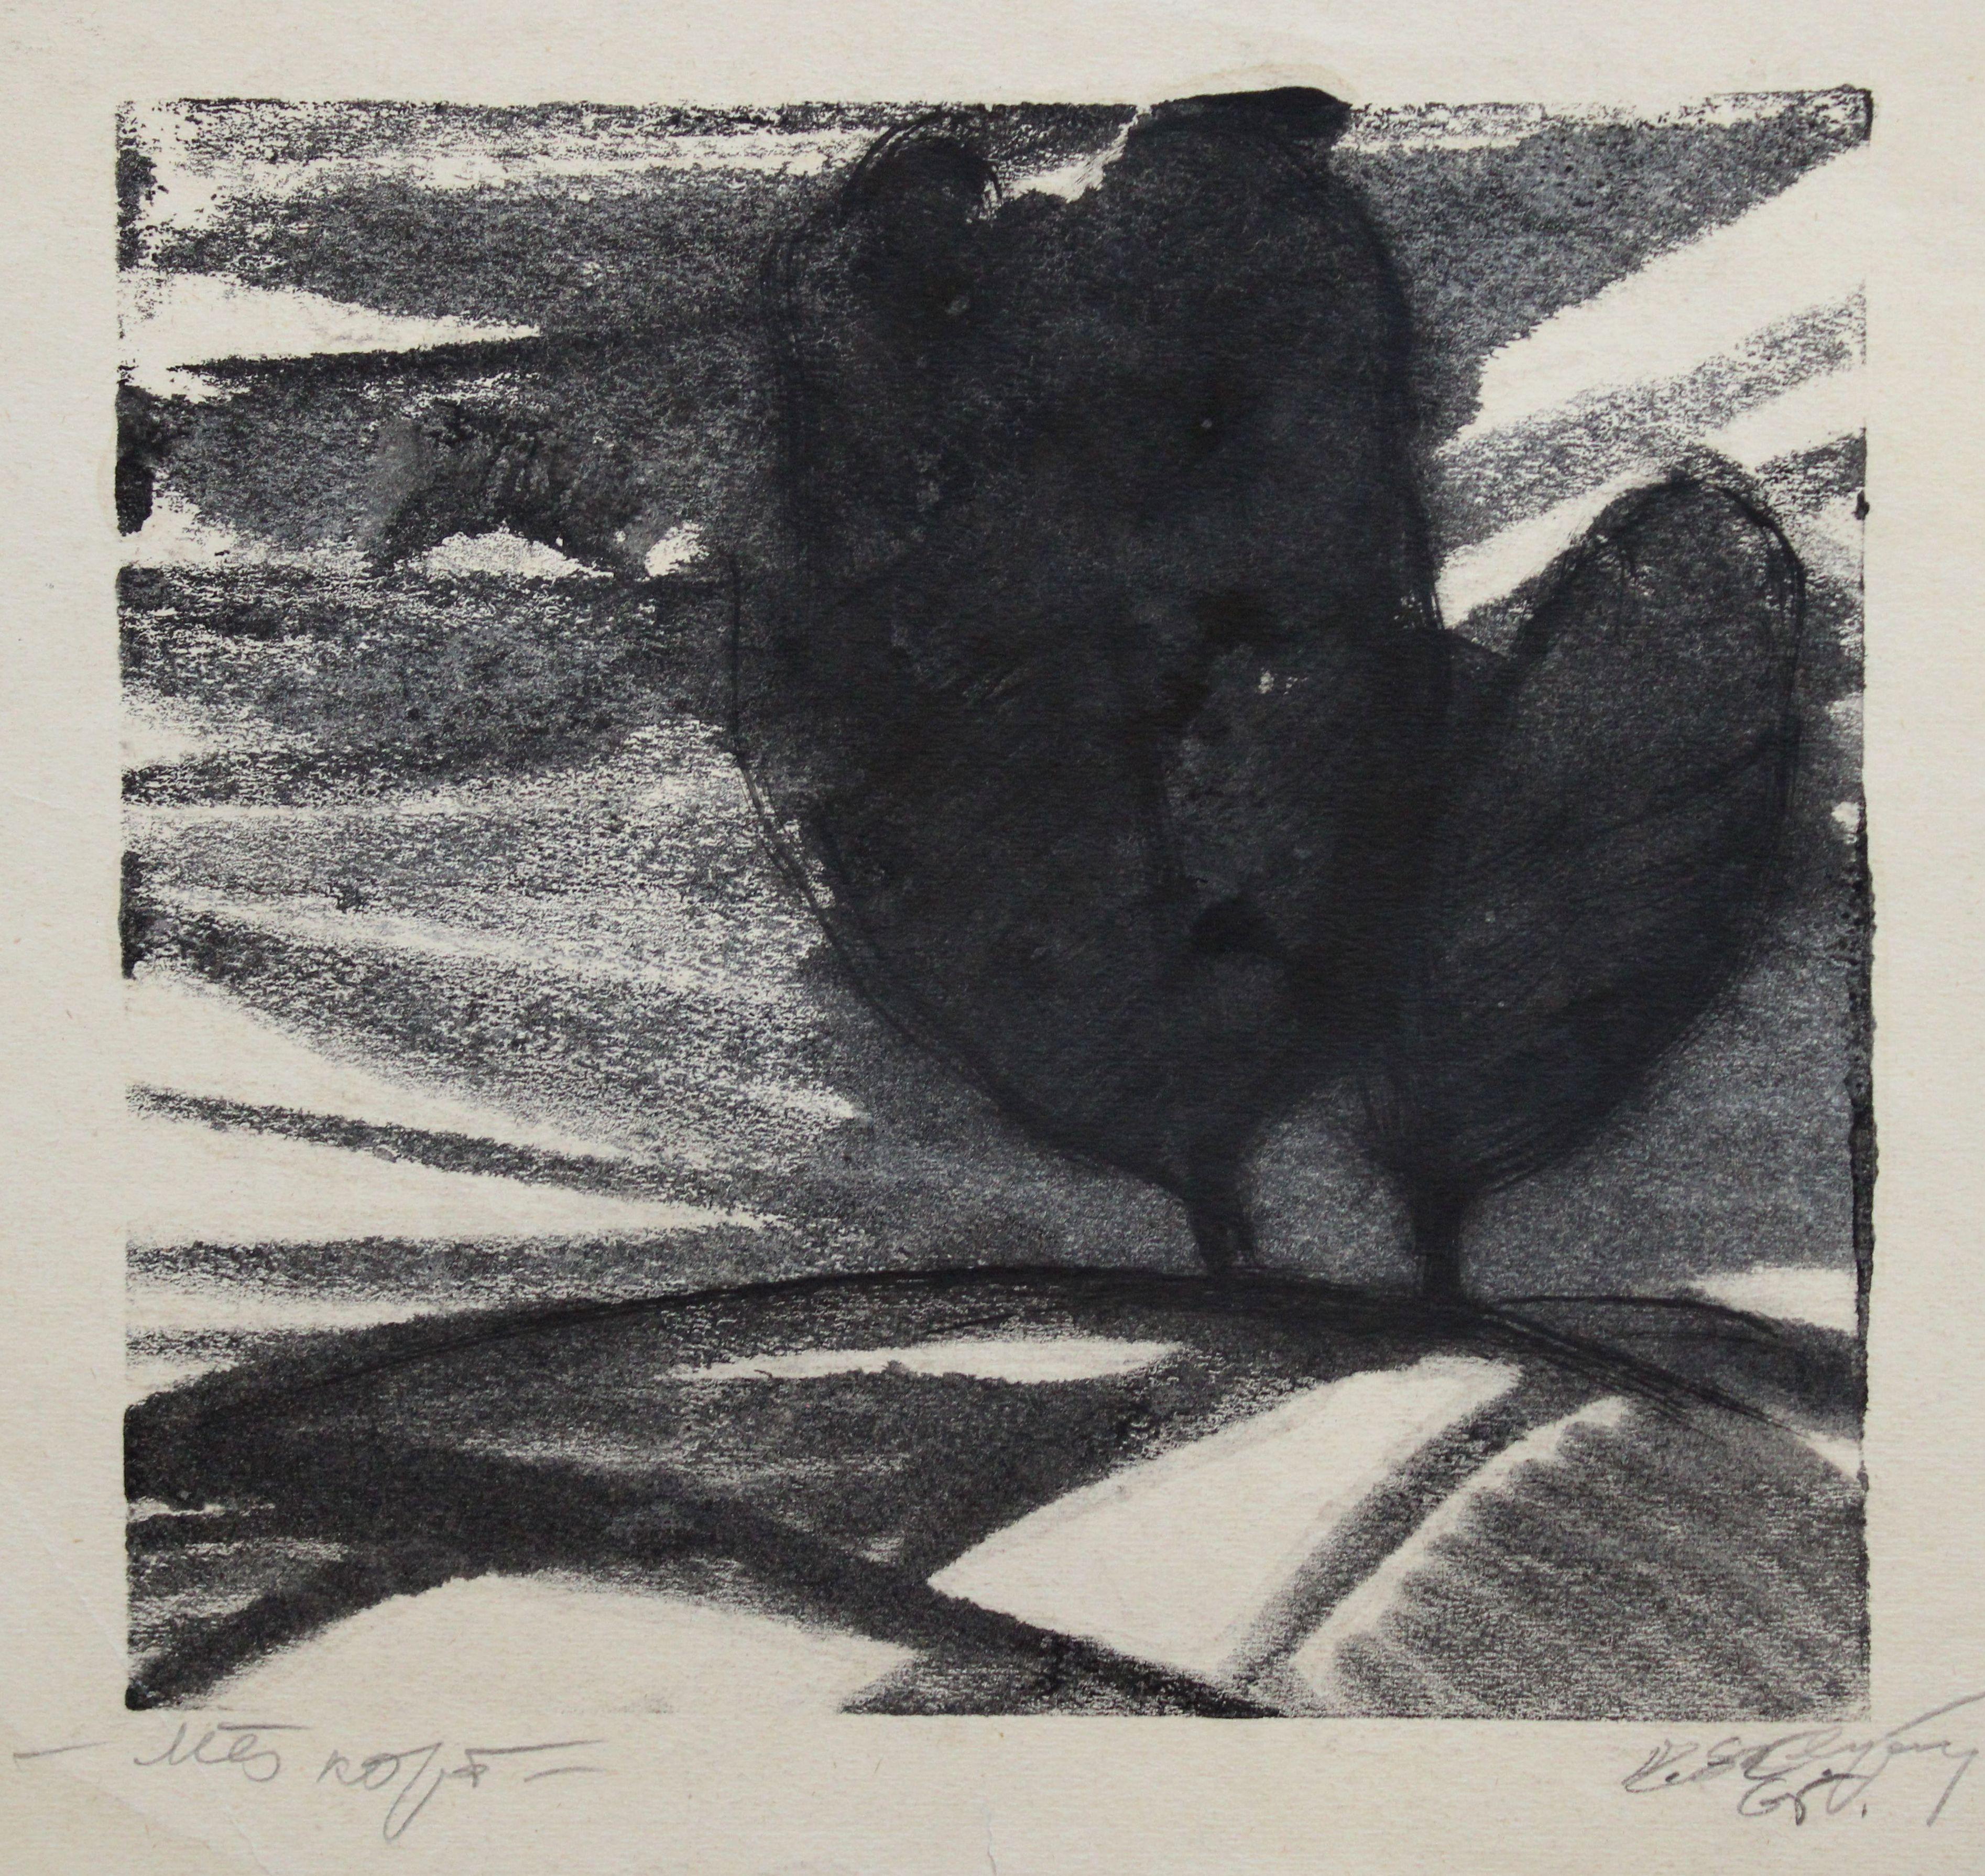 Dzidra Ezergaile Abstract Print - We are together. 1965, paper, lithography, 25x27 cm